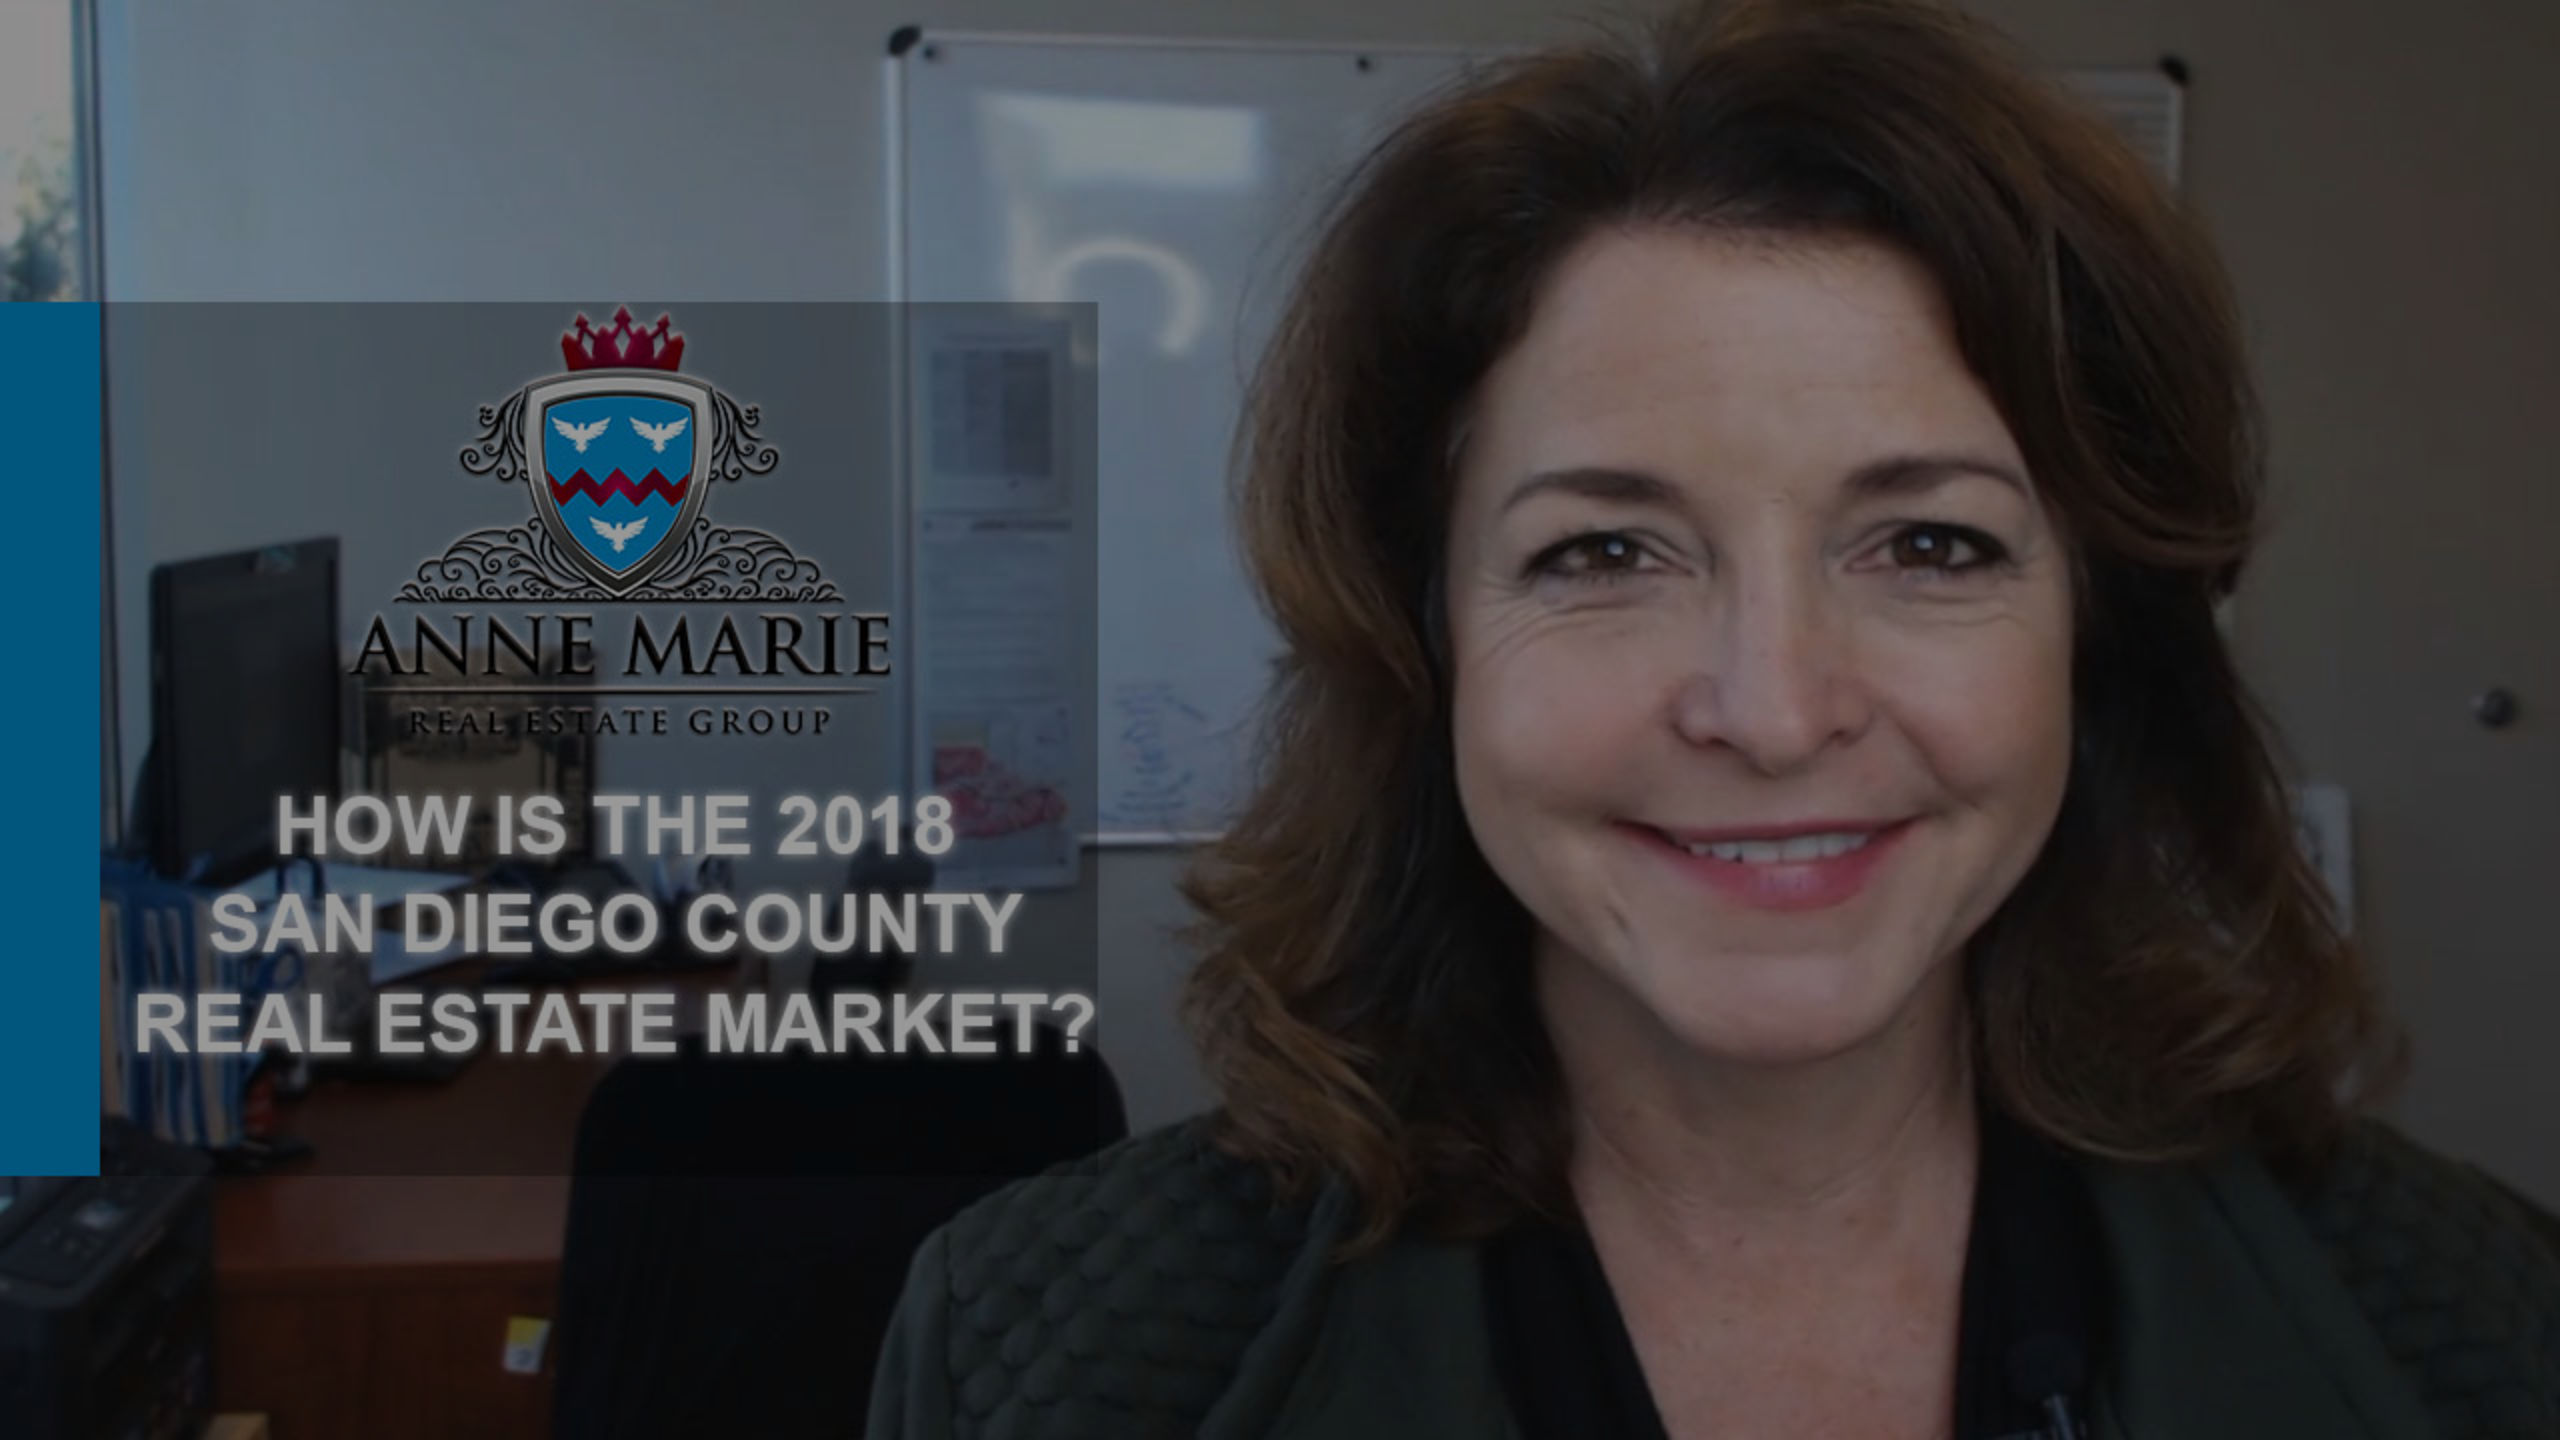 Your 2018 San Diego County Real Estate Market Update